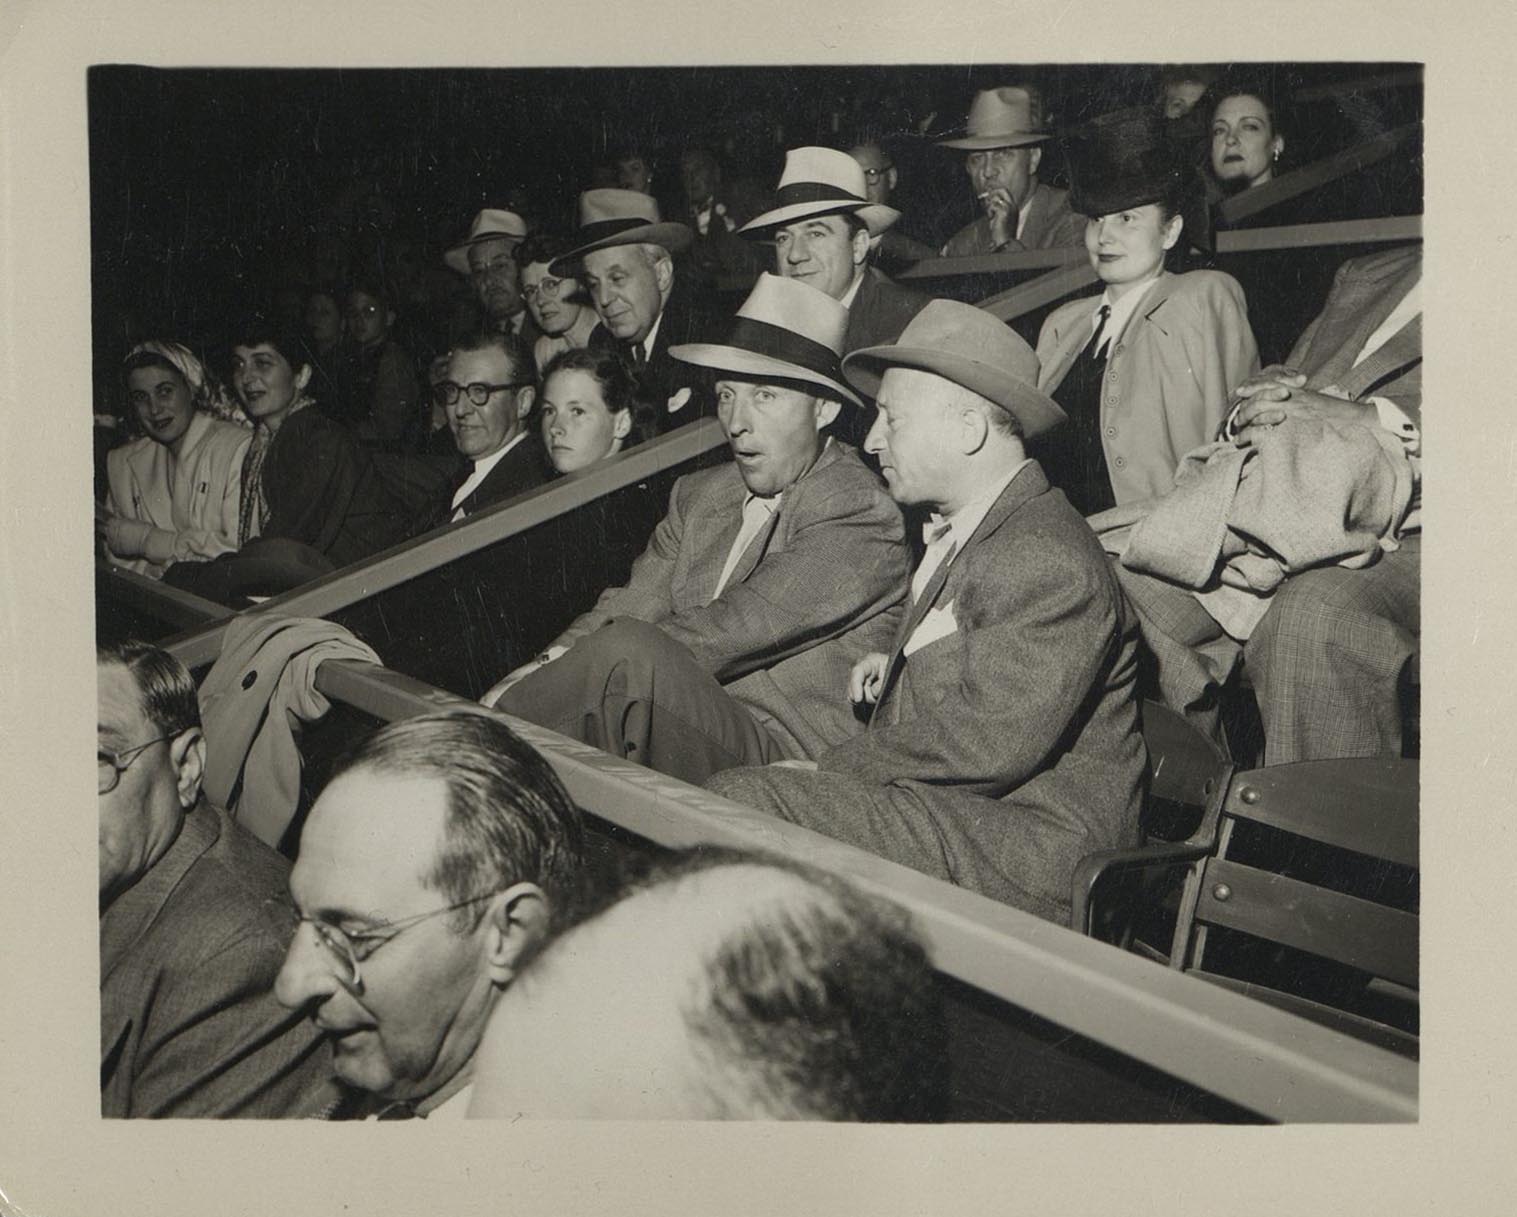 Bing Crosby in box seats surrounded by people